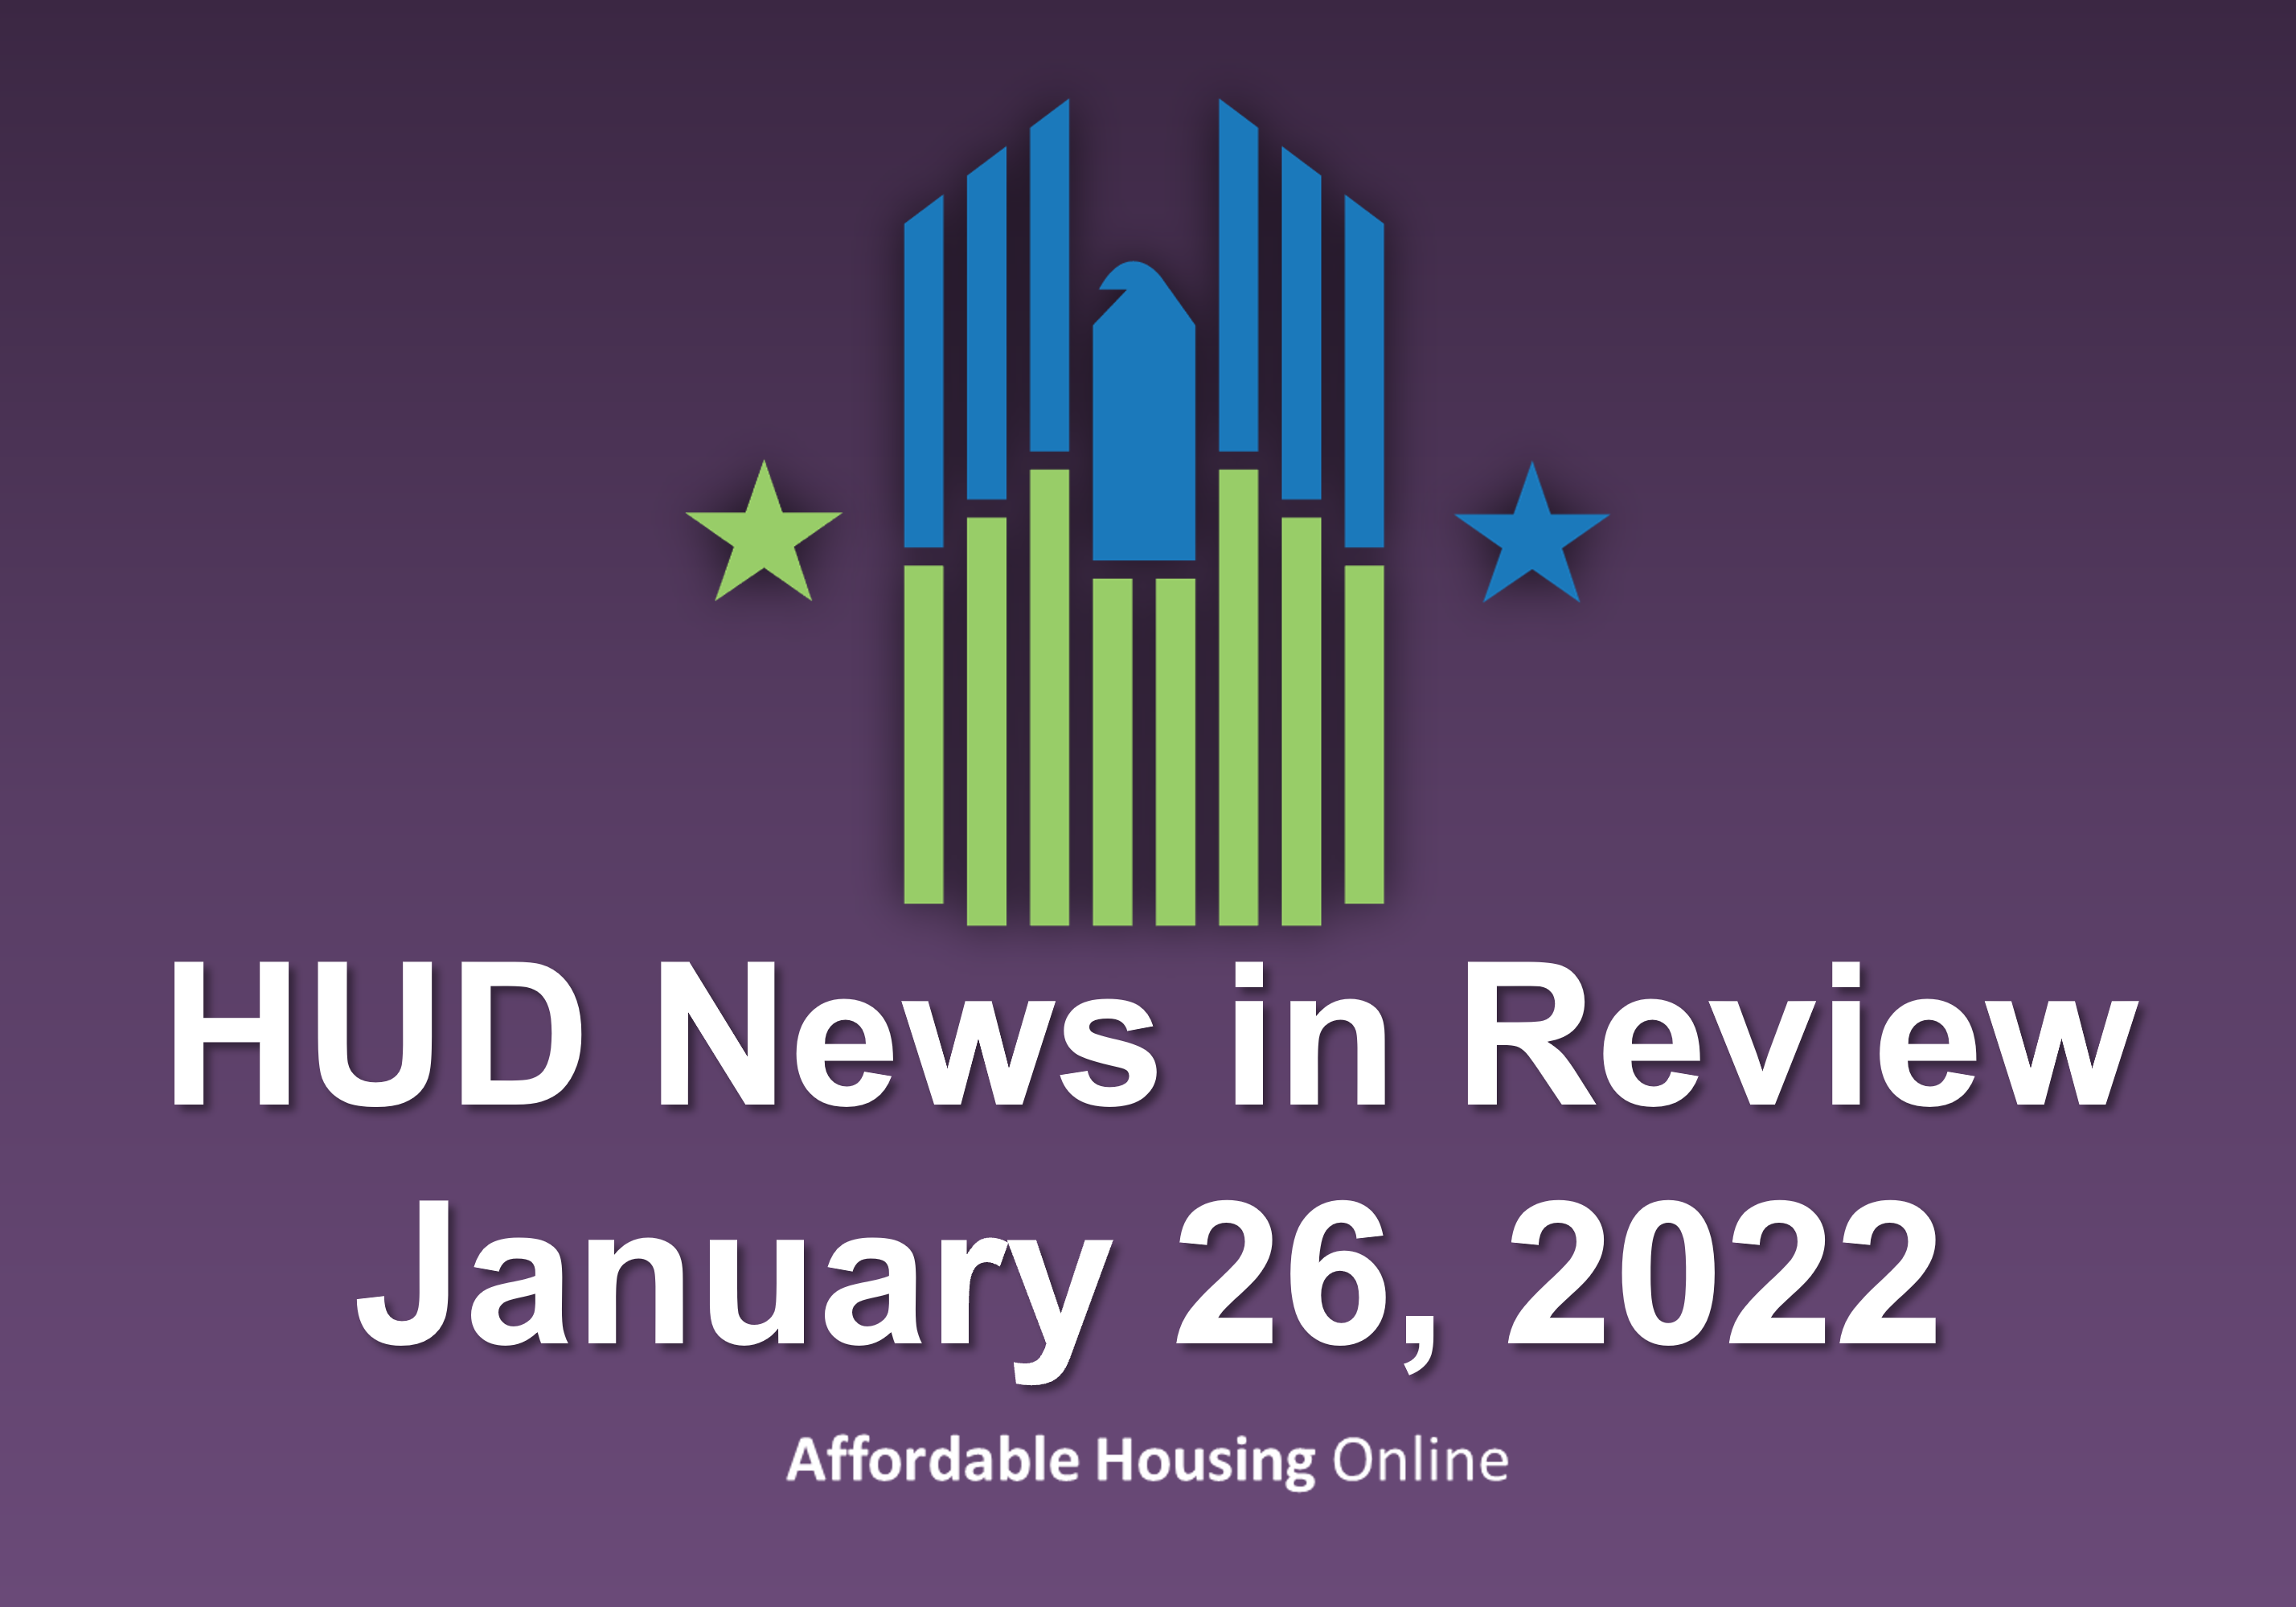 HUD News in Review banner image for January 26, 2022